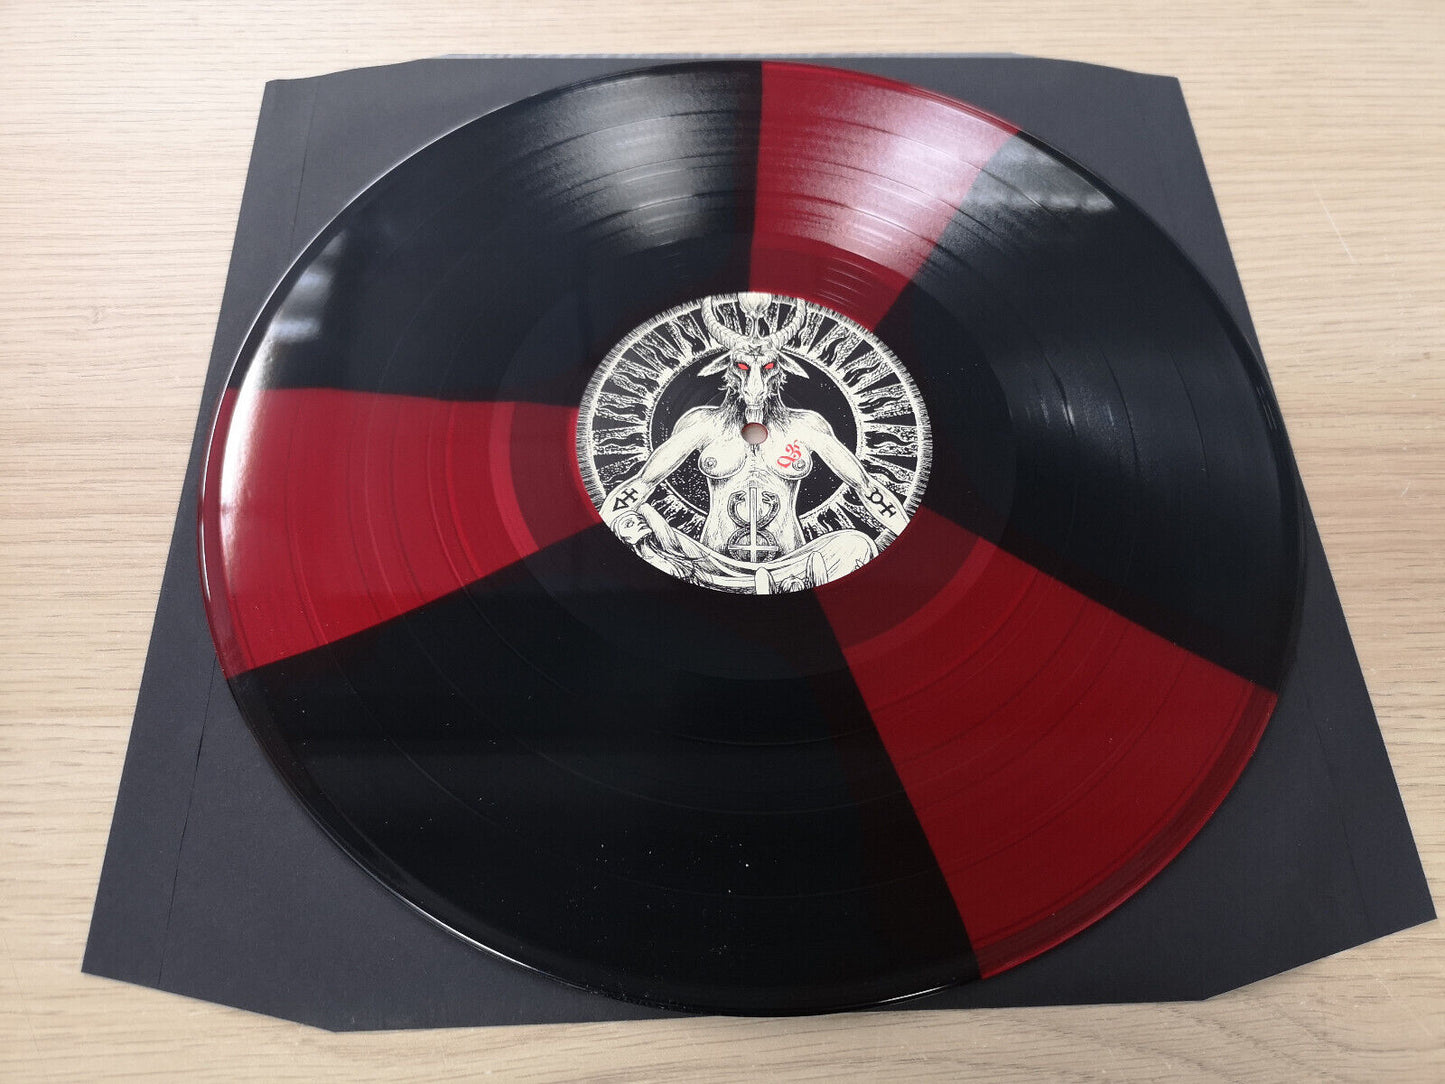 Archgoat "The Luciferian Crown" NEW Re Red/Black Vinyl w/ Booklet